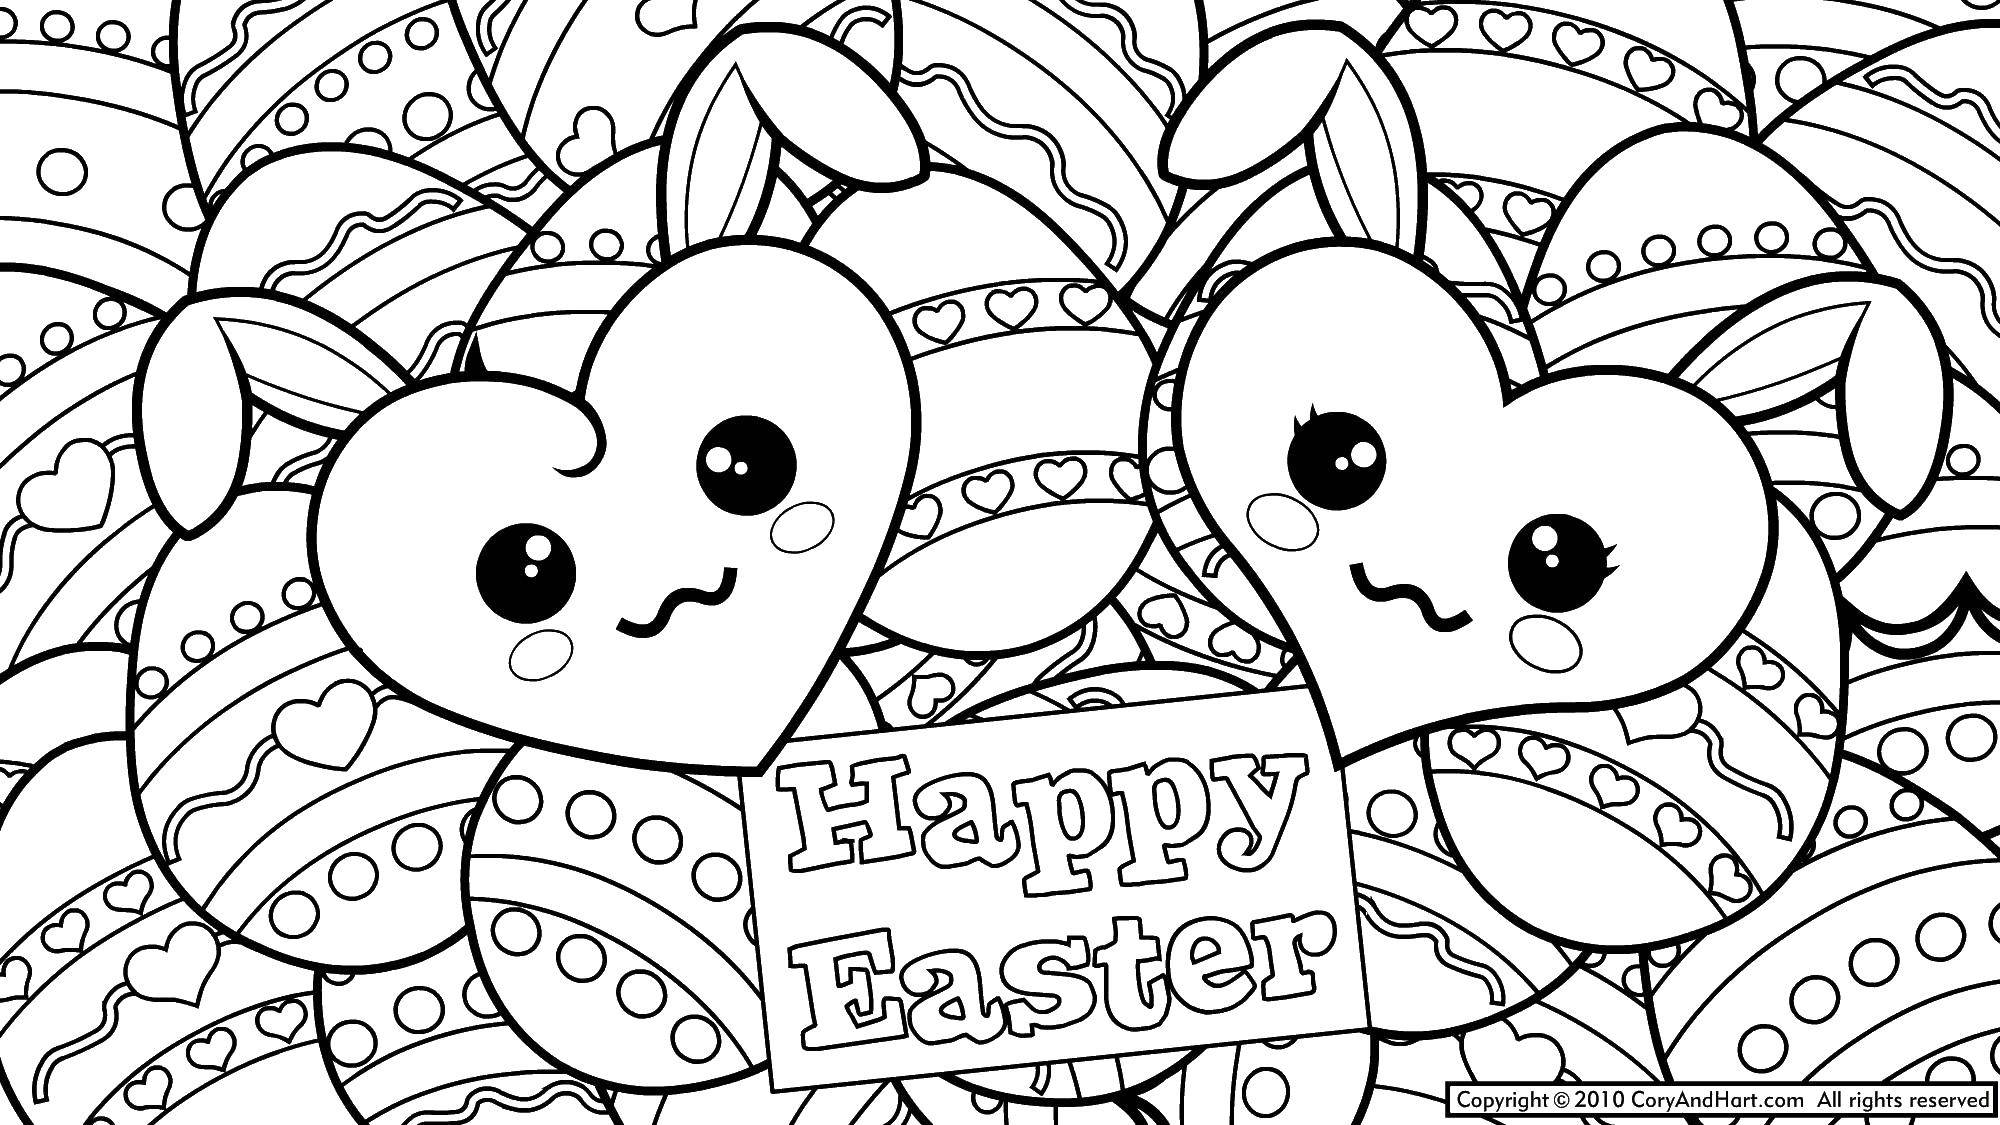 Coloring Happy Easter!. Category Easter. Tags:  Easter, eggs, patterns, holiday.